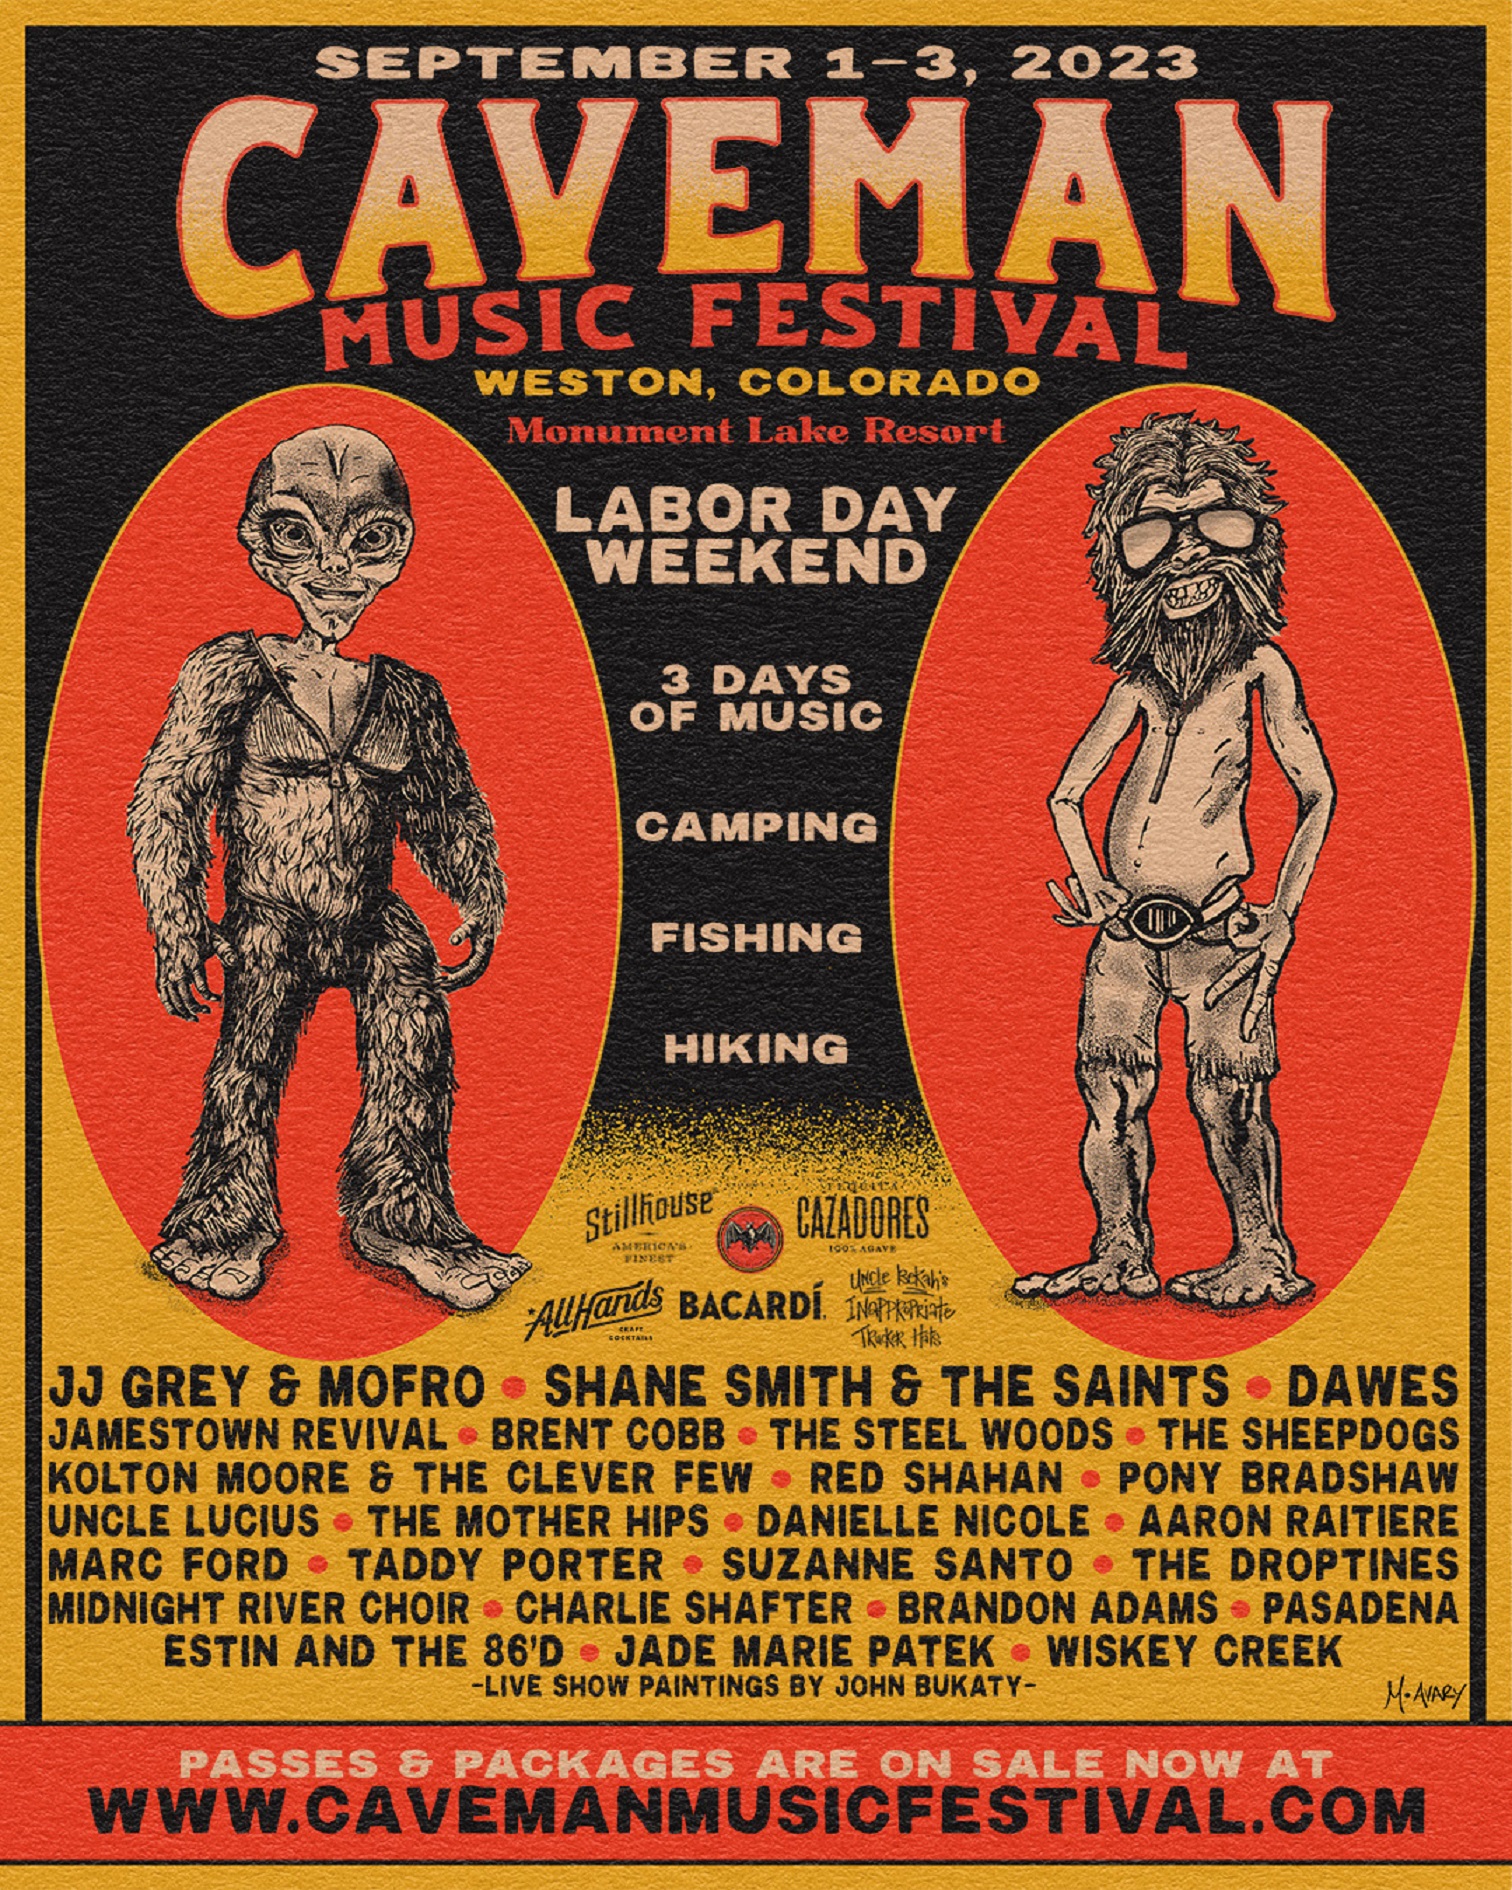 Caveman Music Festival Taps the Spectacular Wonderlands and Mysteries of the Colorado Mountains